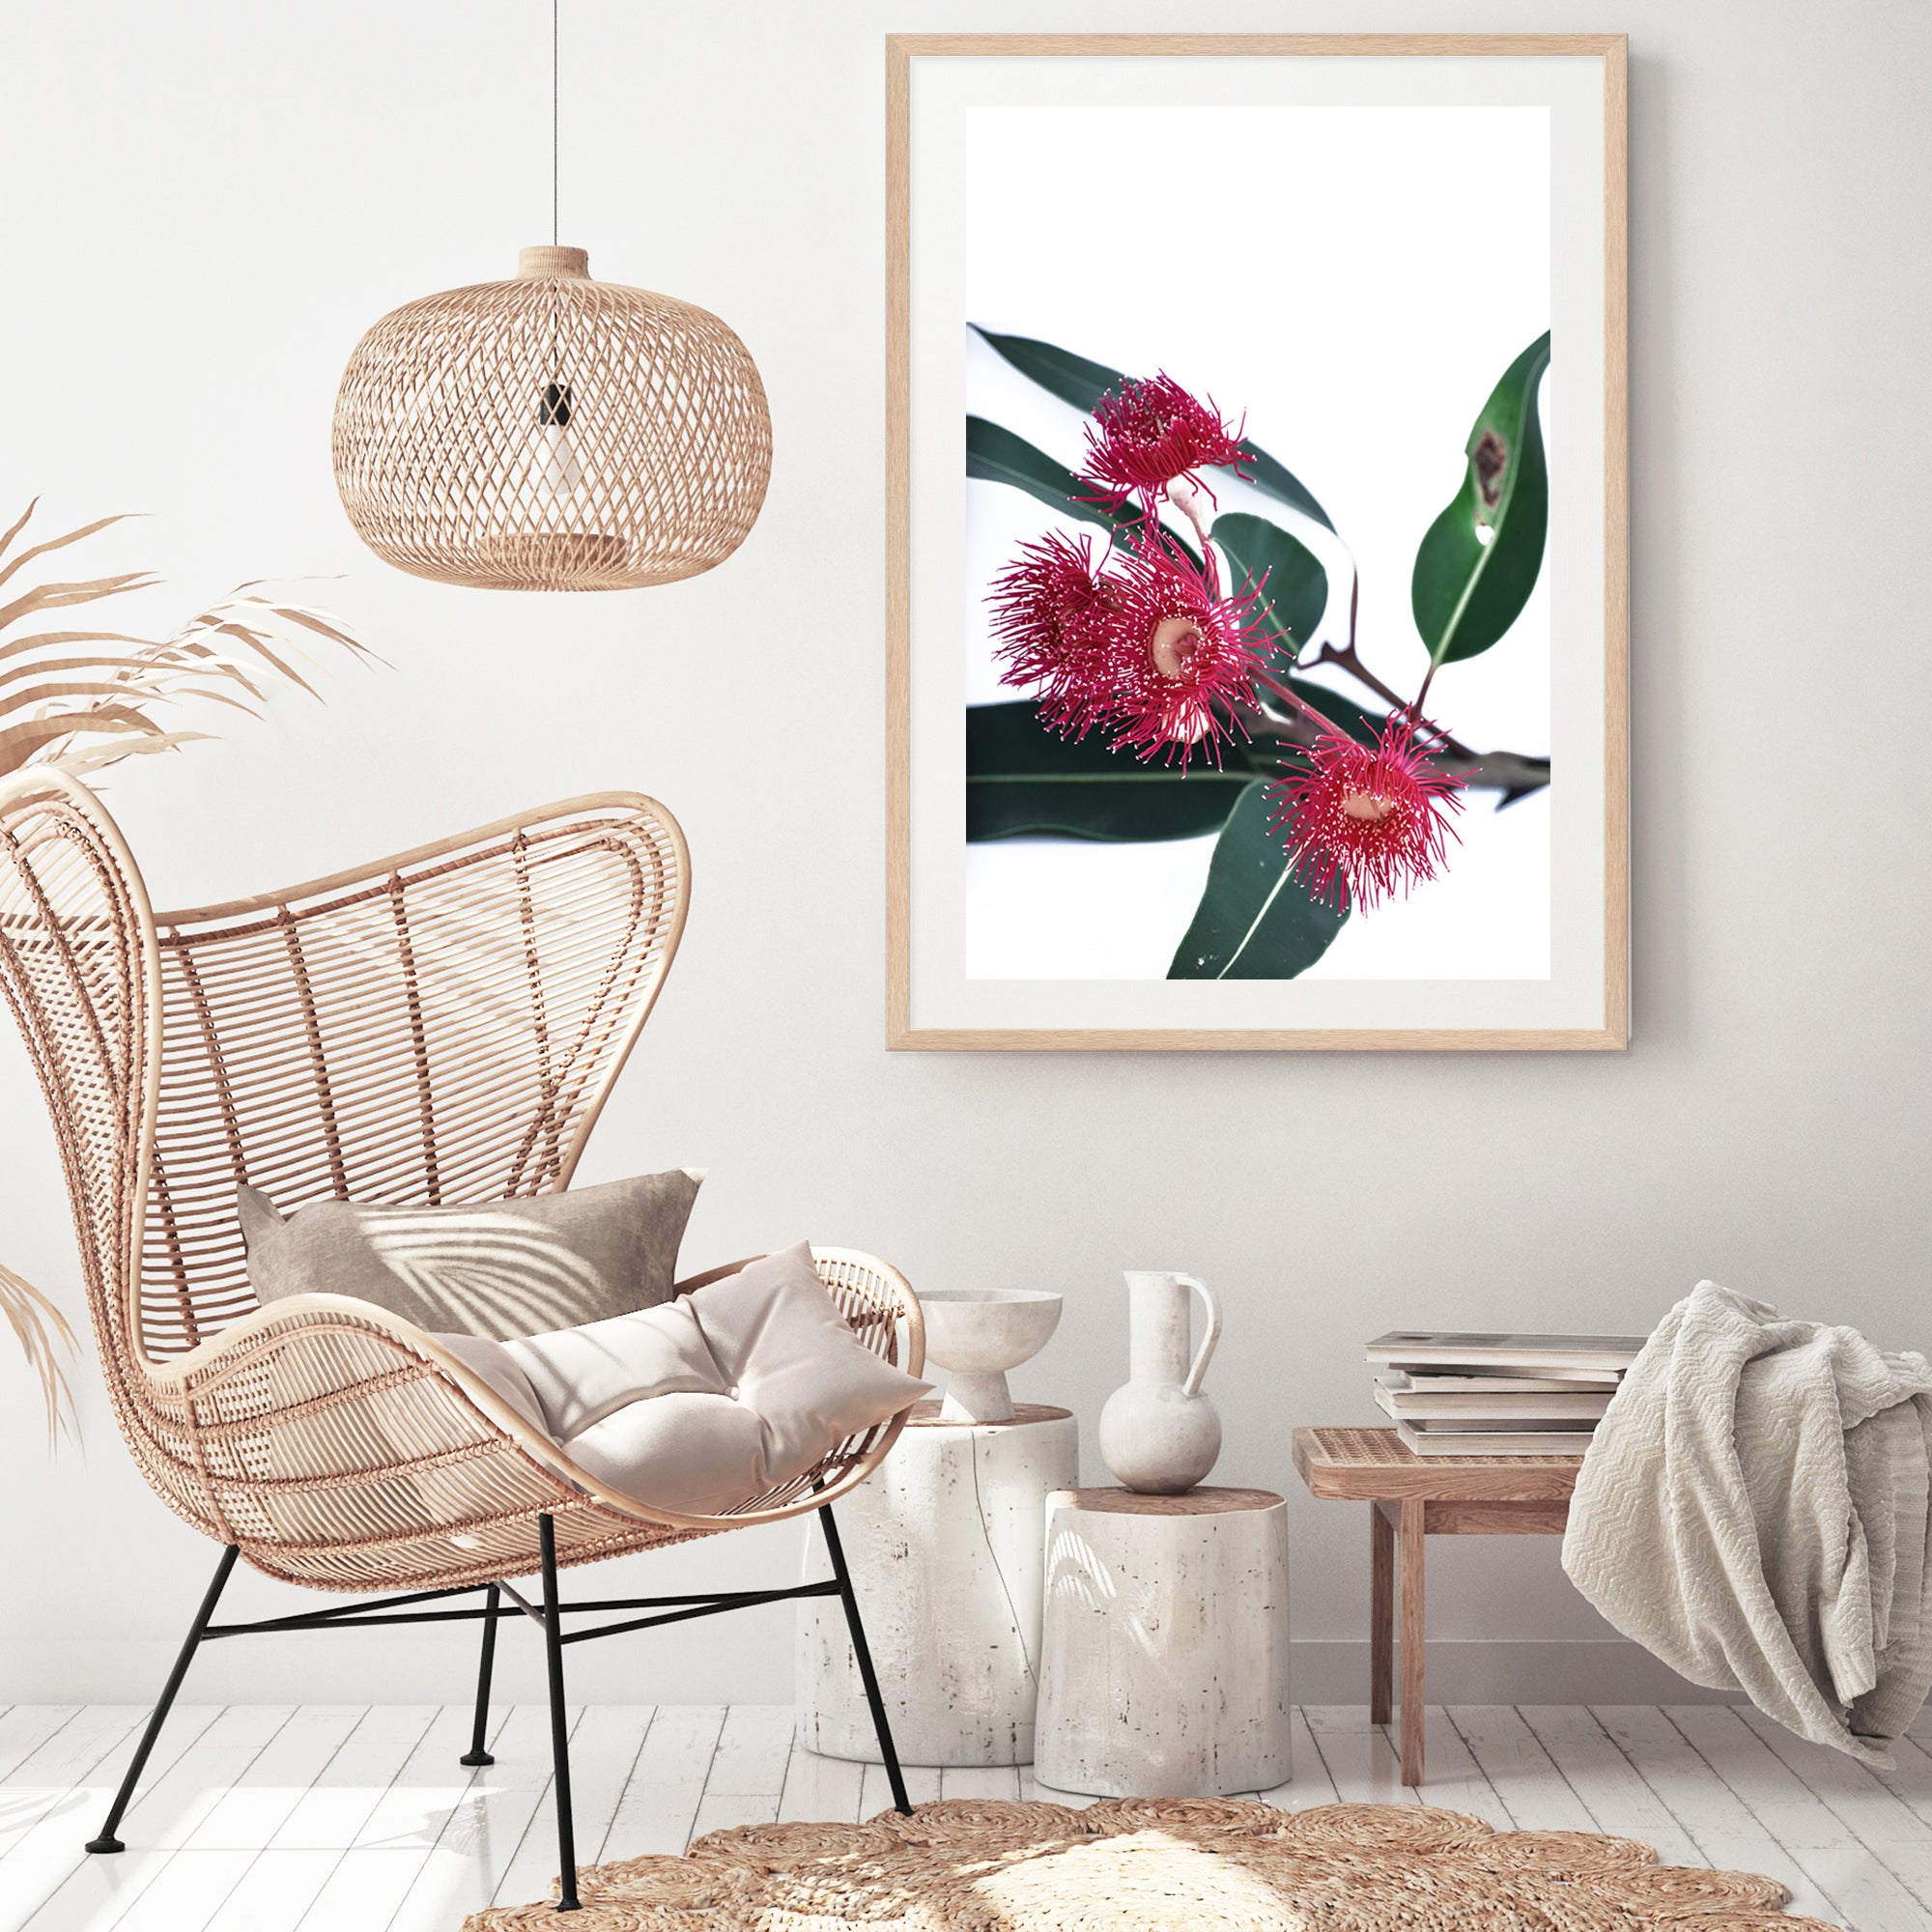 A floral photographic artwork in canvas featuring beautiful red wild flowers A and green eucalyptus leaves, available framed or unframed.